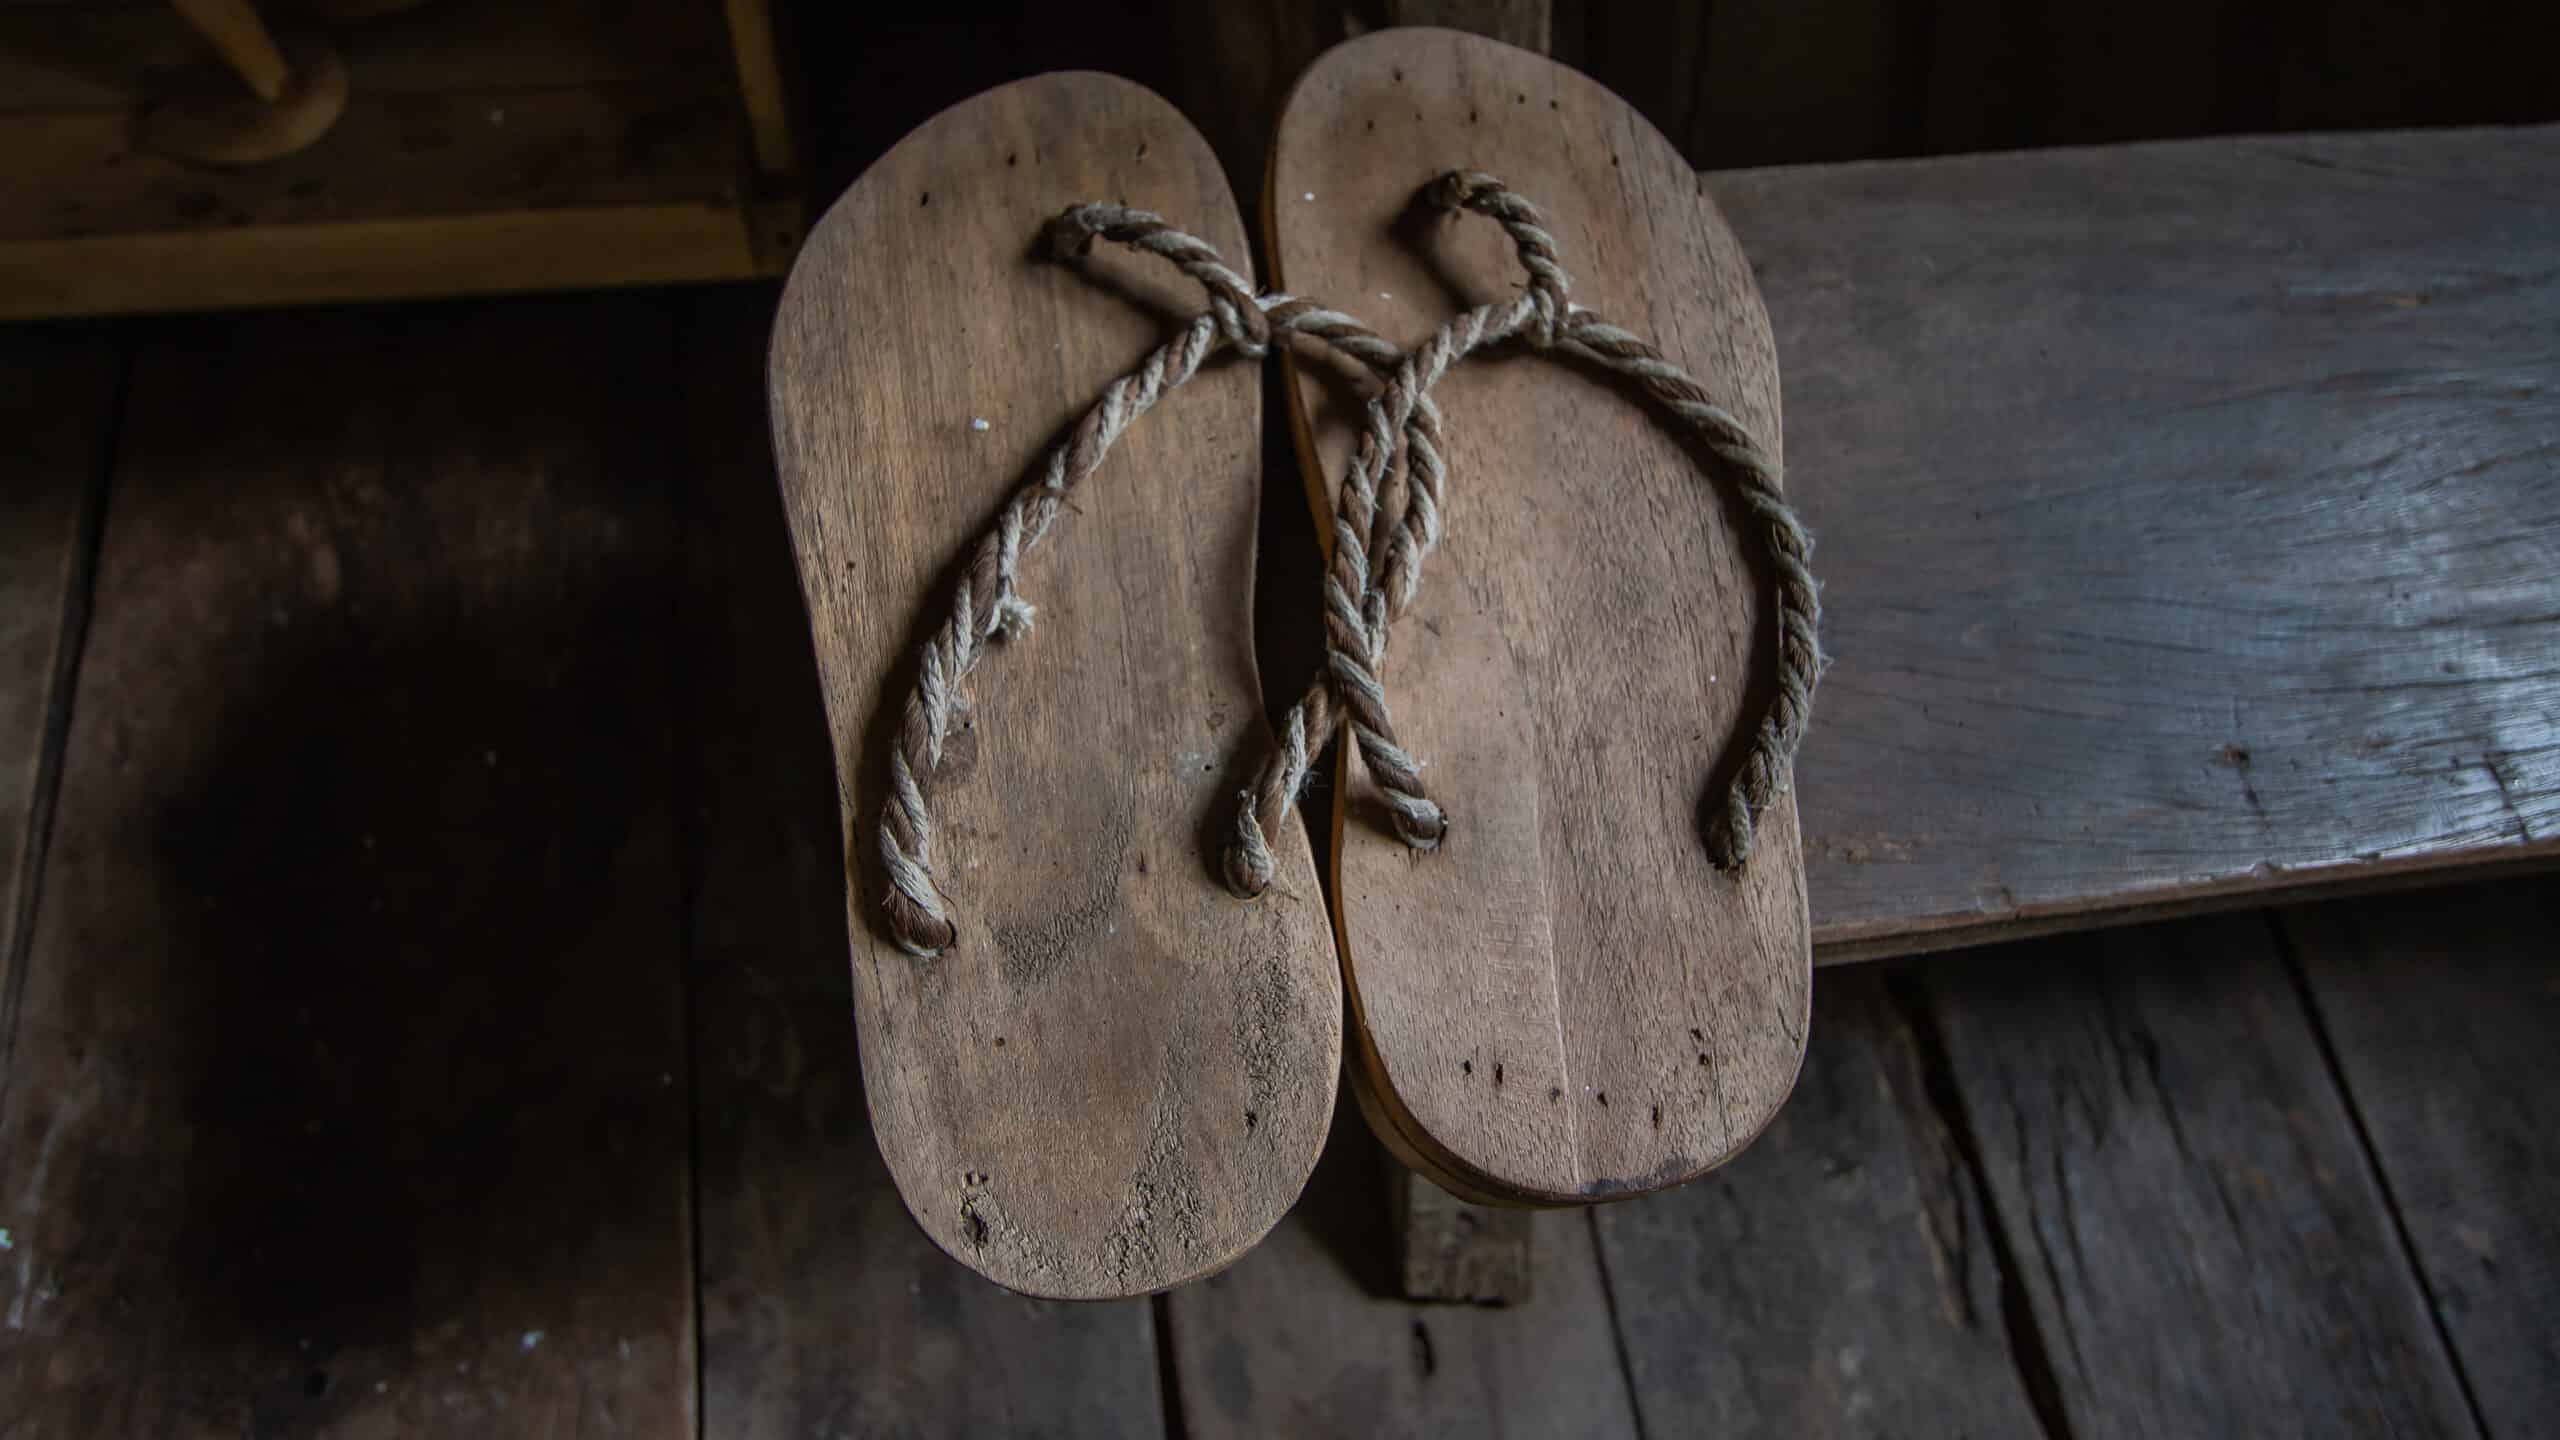 Center frame: Avery simple pair of rope and wooden sandals against a wooden background. The sandals resemble ancient flip-flops, with a loop of string attached to the wooden sole at the top for the toes to grasp, with one upside down V shape of rope attached at the heel end of the wooden sole on theft and the right. All natural colors.